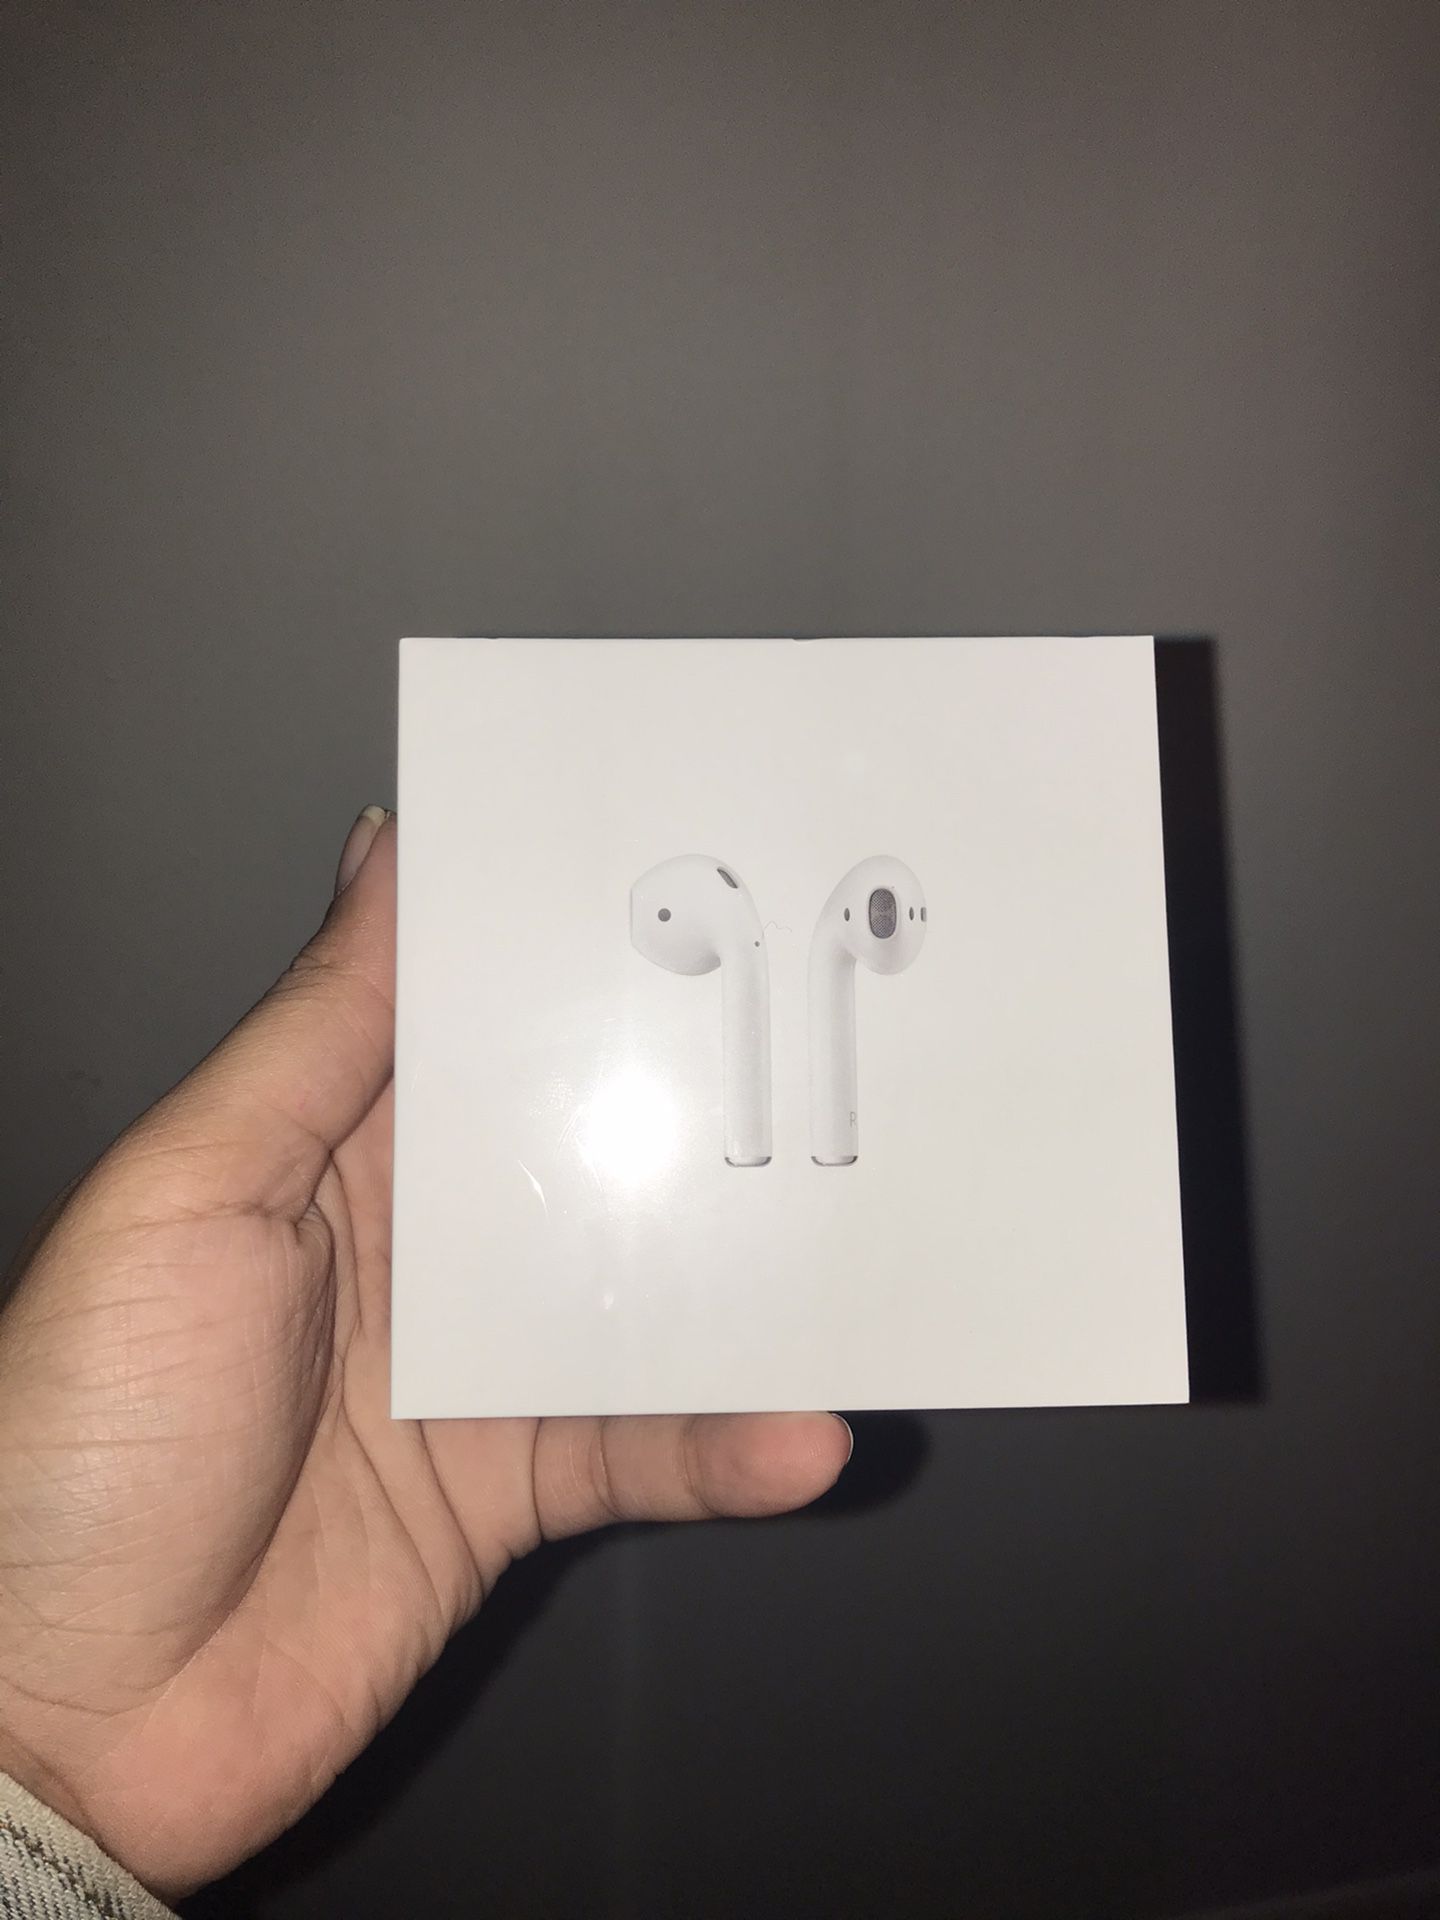 2nd generation Apple AirPods